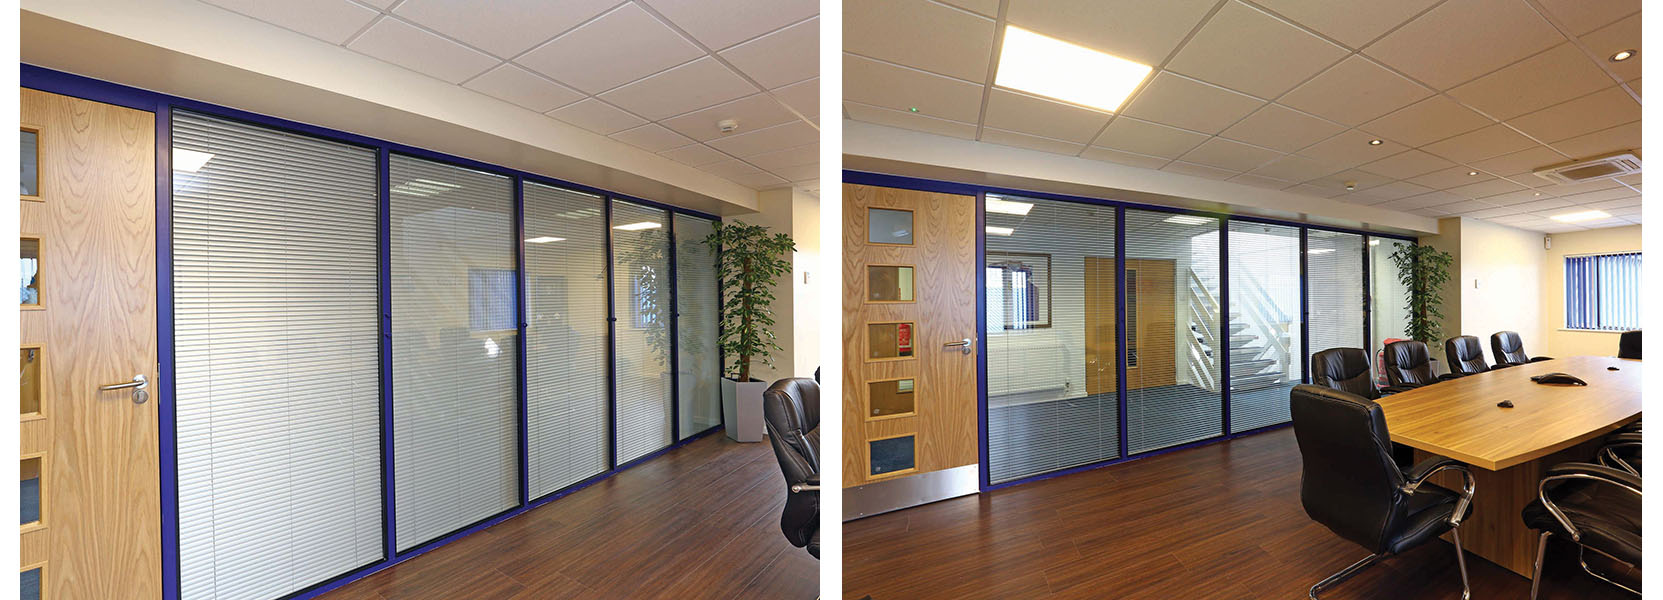 Longline 100 Partitioning System